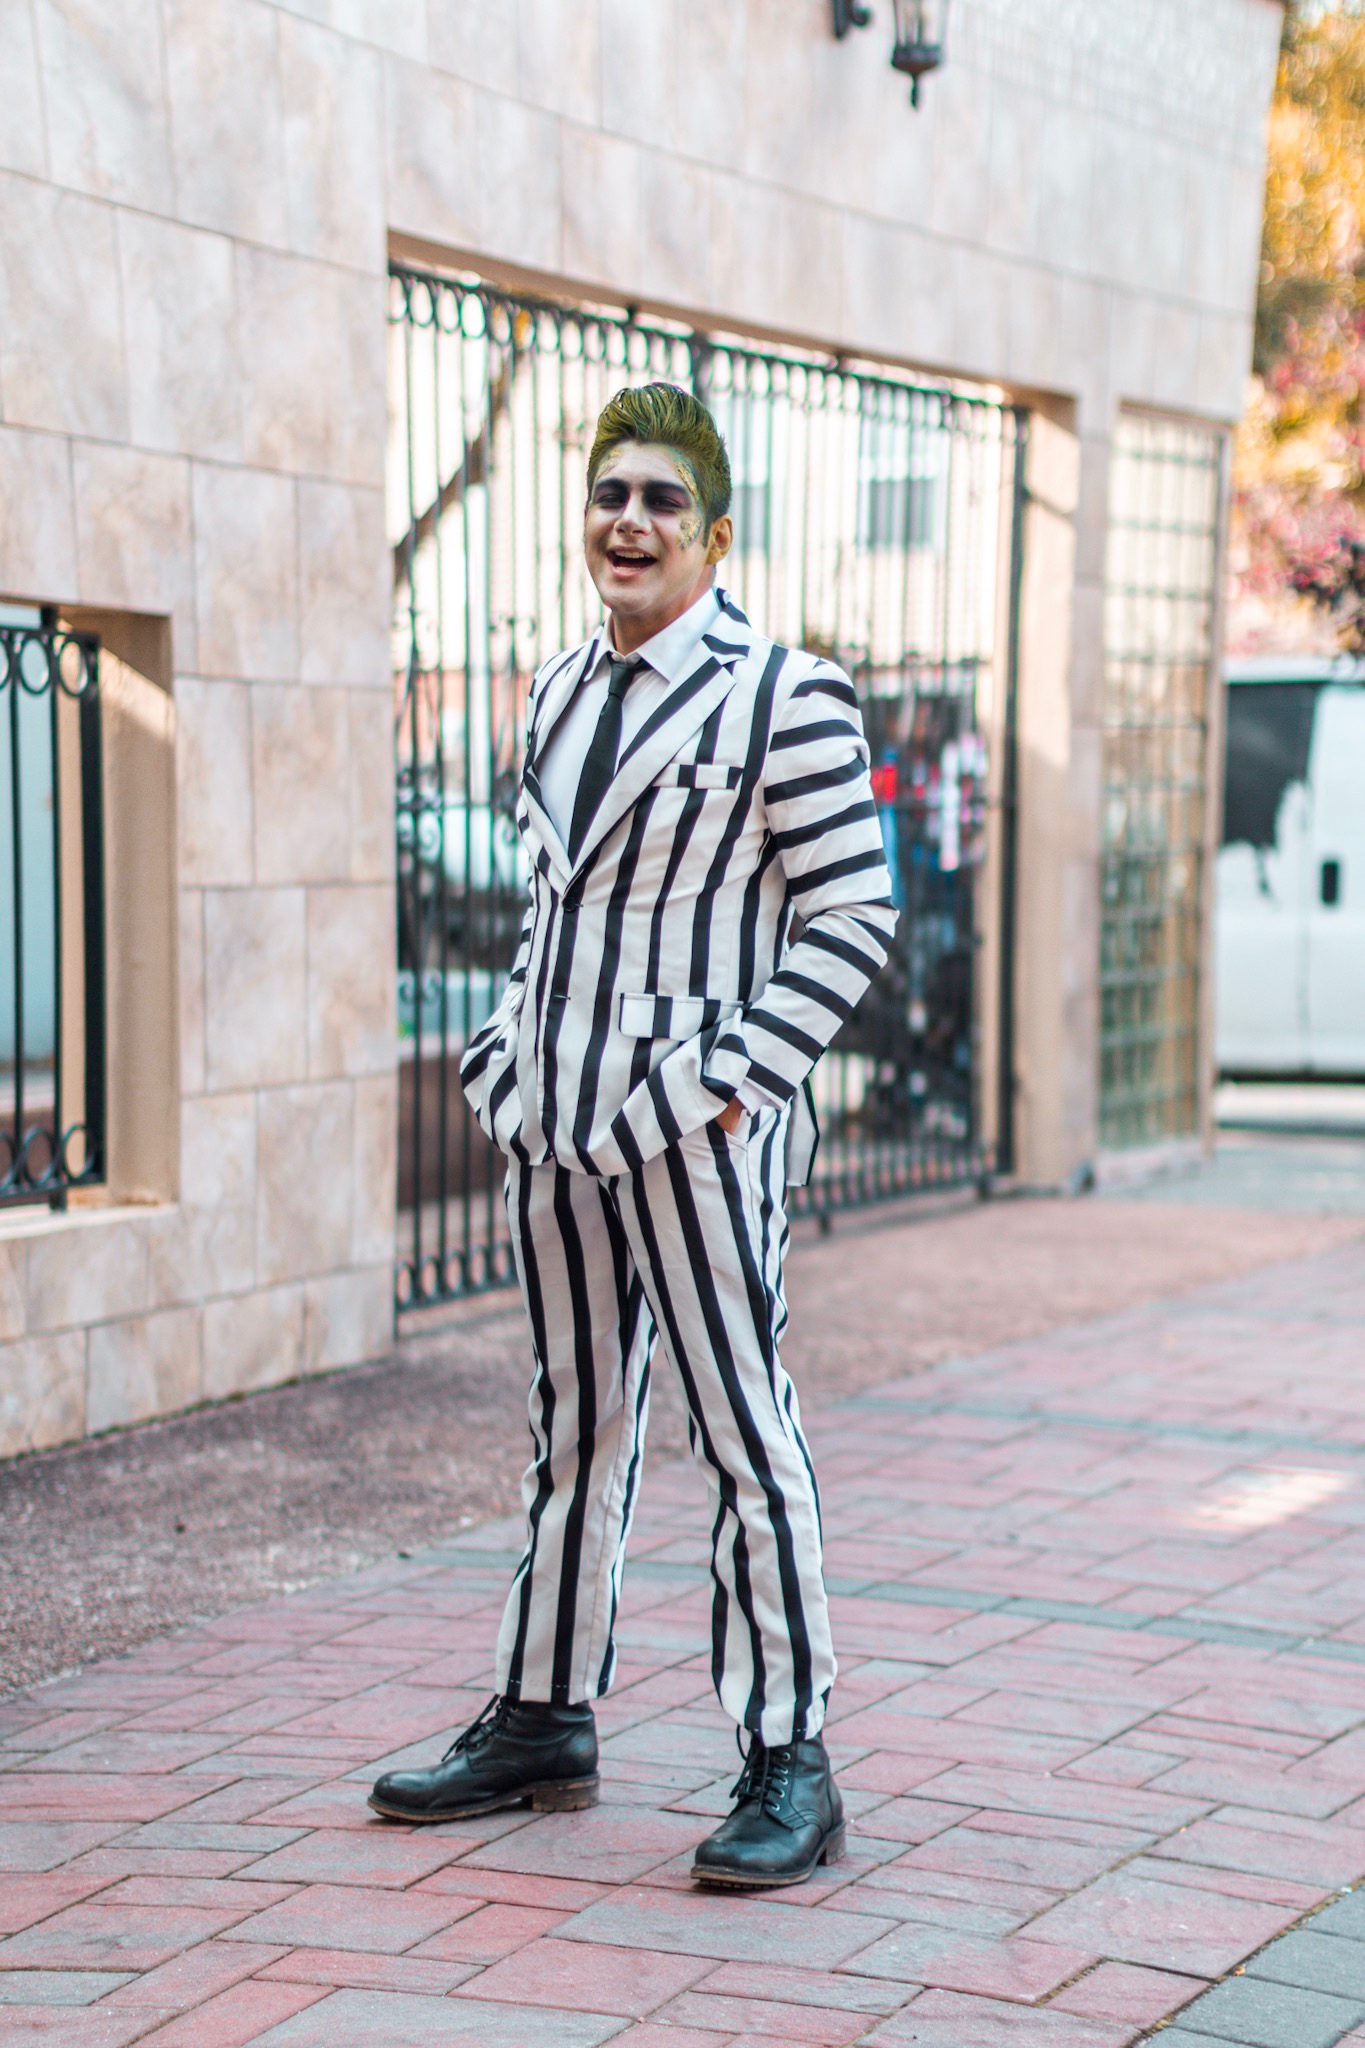 In the image, there's a person standing on a brick pavement with a cheerful demeanor. They are dressed in a unique, bold suit that has black and white vertical stripes, evoking the style of a classic movie character known for his mischievous and whimsical personality. The suit is well-fitted, featuring a blazer and trousers that match in pattern. The person's hair is styled upwards and colored a vibrant green, complementing the theatrical theme of the outfit. Their face is painted white with darkened eyes and a wide, exaggerated smile, adding to the playful and dramatic effect. Behind them is a background of a gated fence and a building with a stone facade, which brings a sense of urbanity to the scene. Their pose and expression suggest confidence and a sense of fun, embodying the spirit of a character who is both entertaining and a bit unconventional.

| BEETLEJUICE cosplay | BEETLEJUICE costume | striped suit | BEETLEJUICE | BEETLEJUICE suit | dandy in the bronx